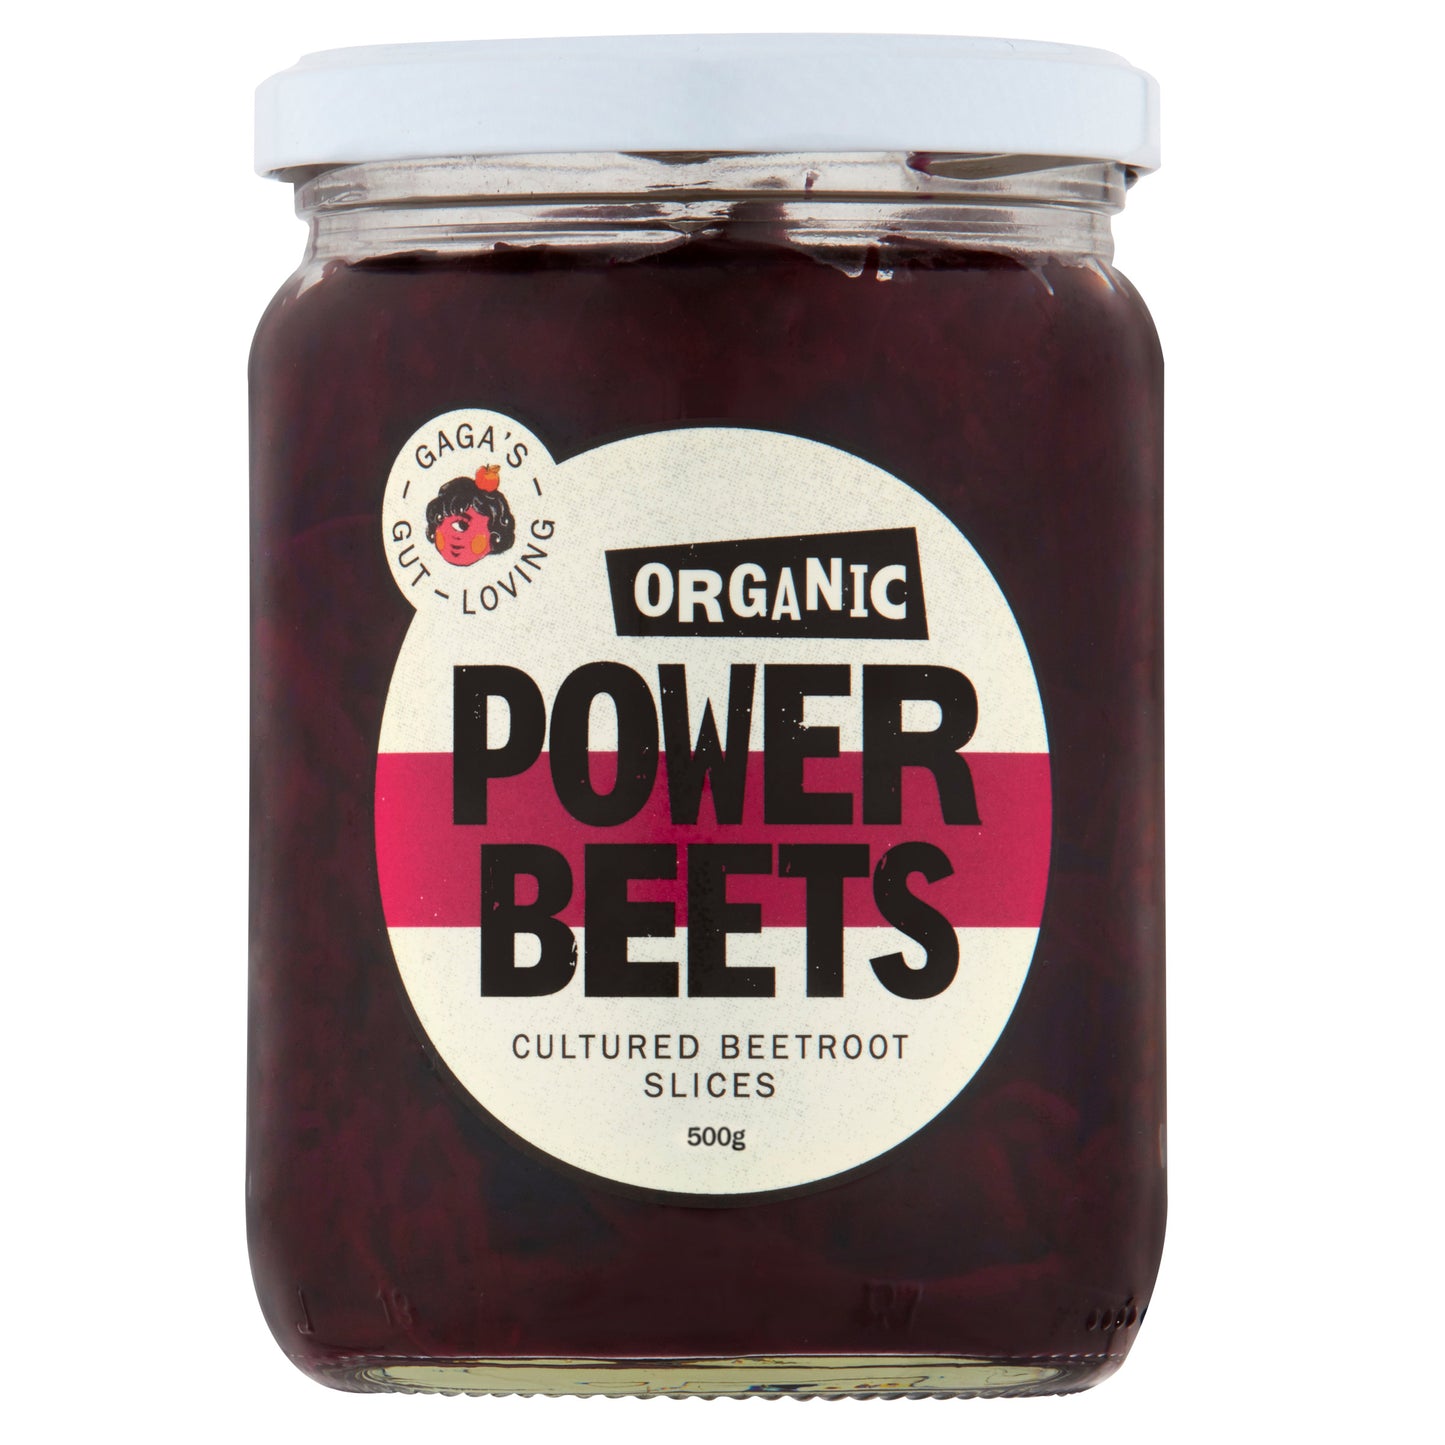 Gaga's Fermented Beet Slices | Box of 6